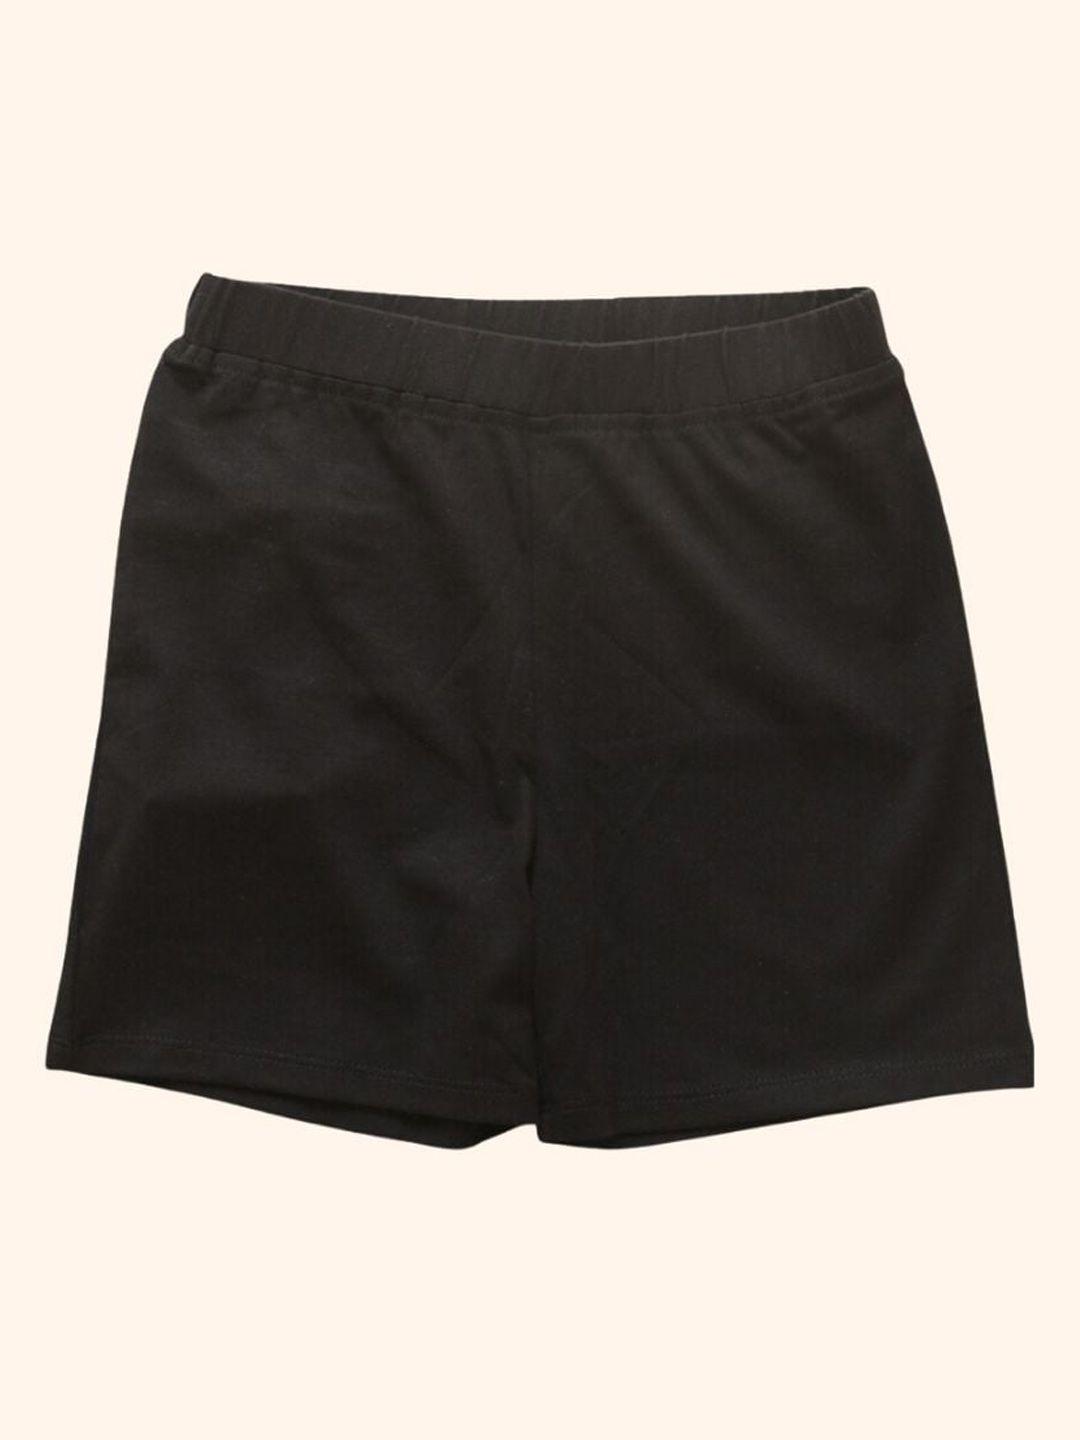 ola! otter infants regular fit mid-rise antimicrobial technology cotton shorts